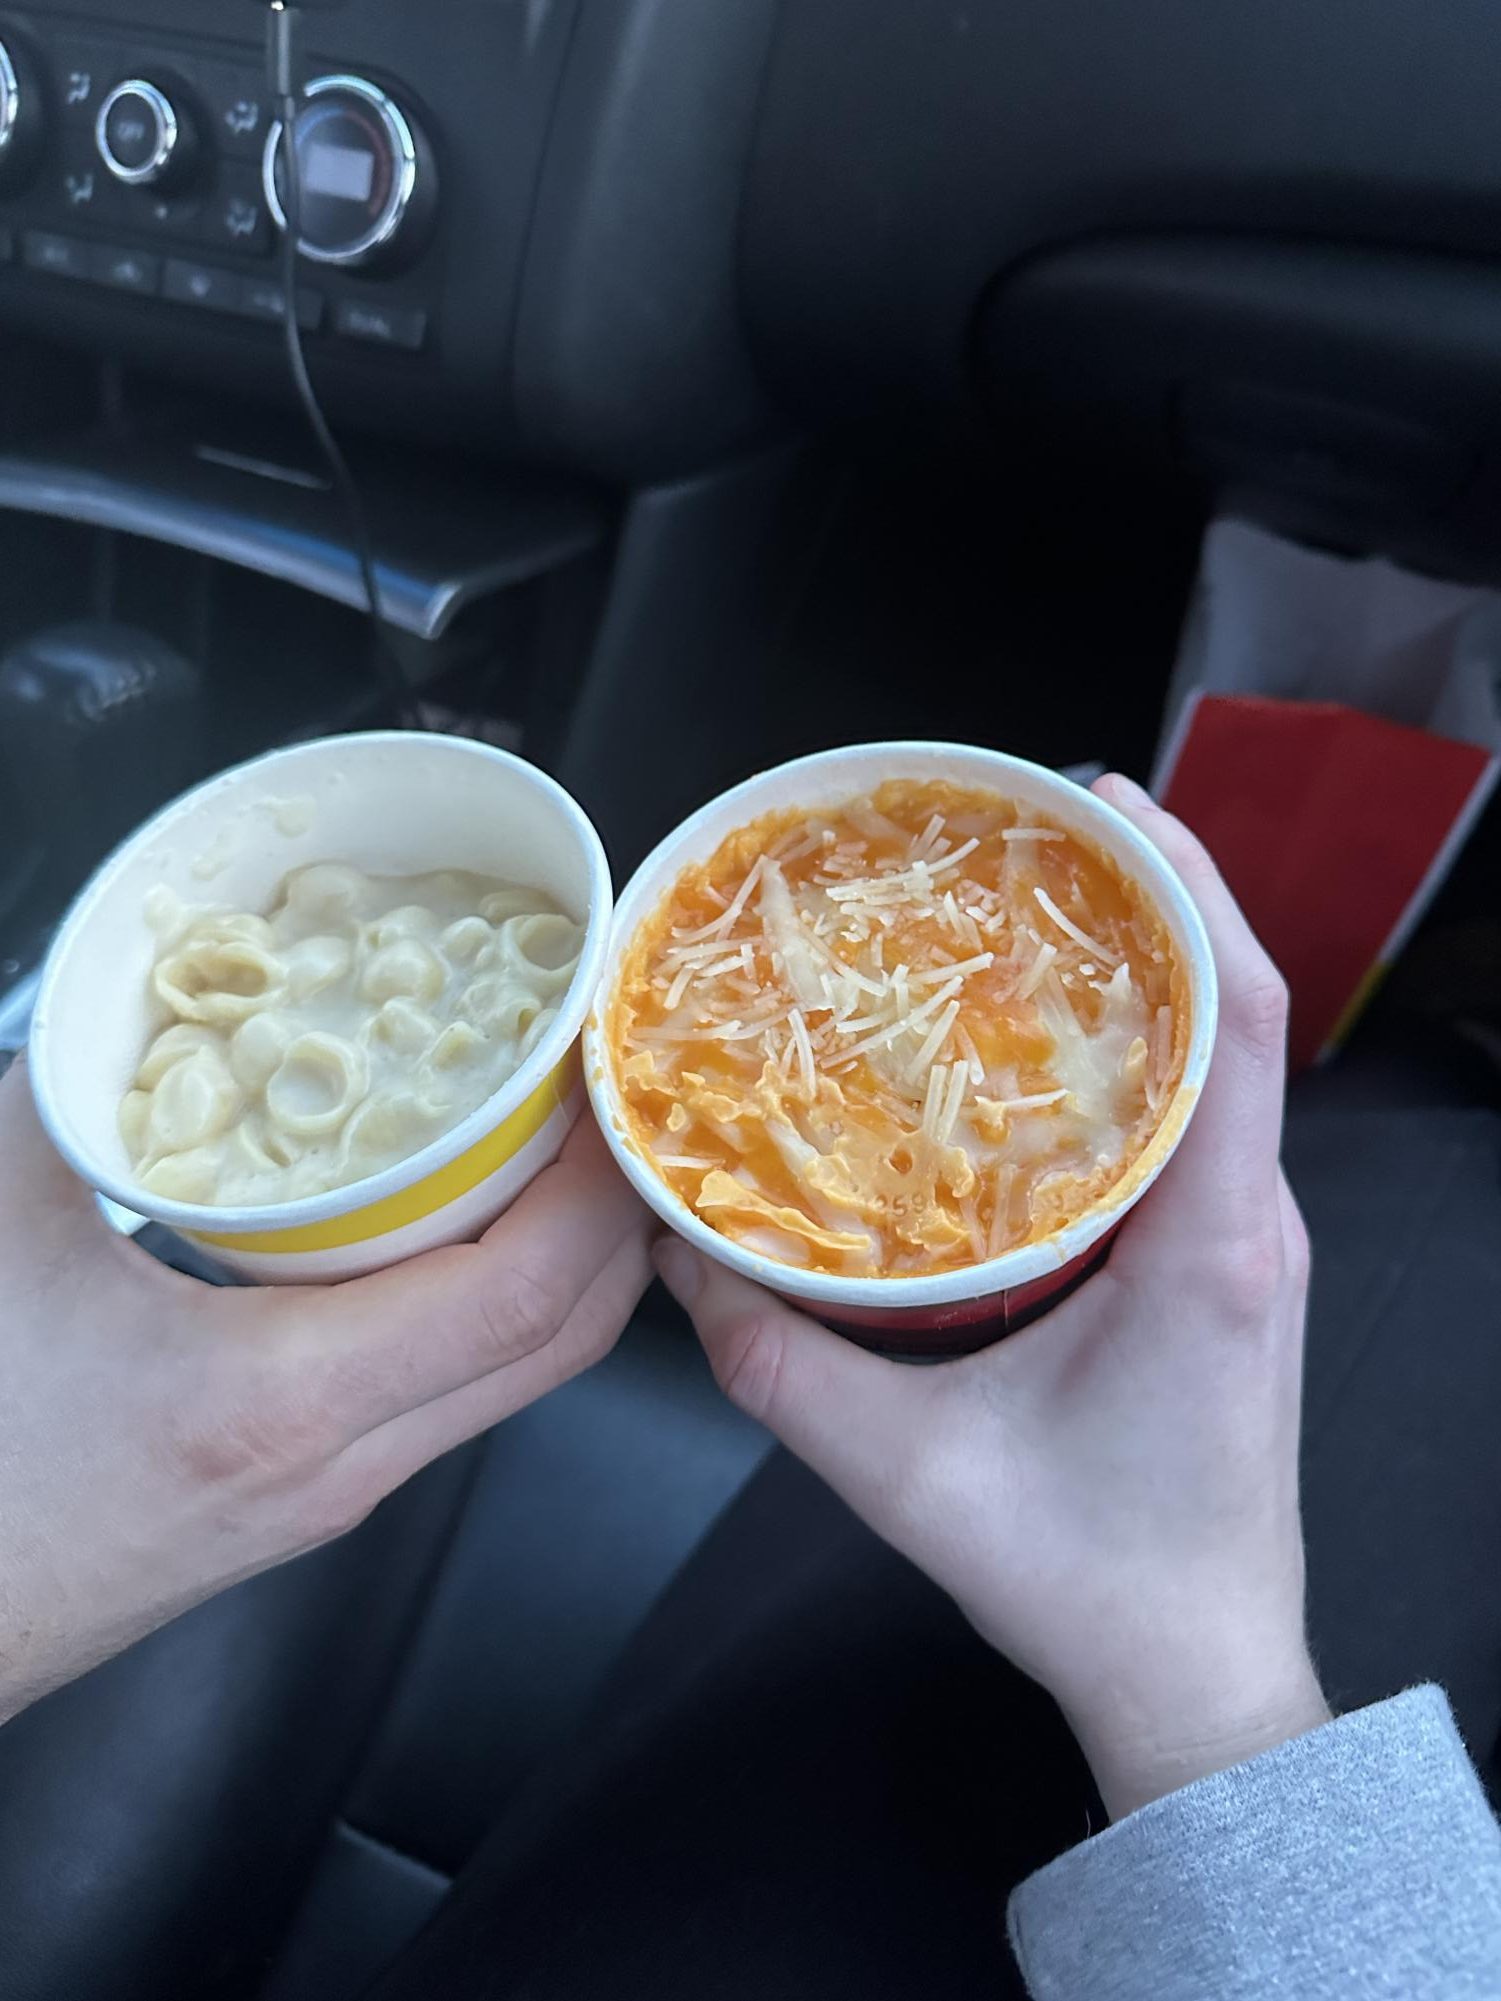 Mac and cheese. We got white cheddar Mac and cheese and a 3-Mac and rated them against each other.